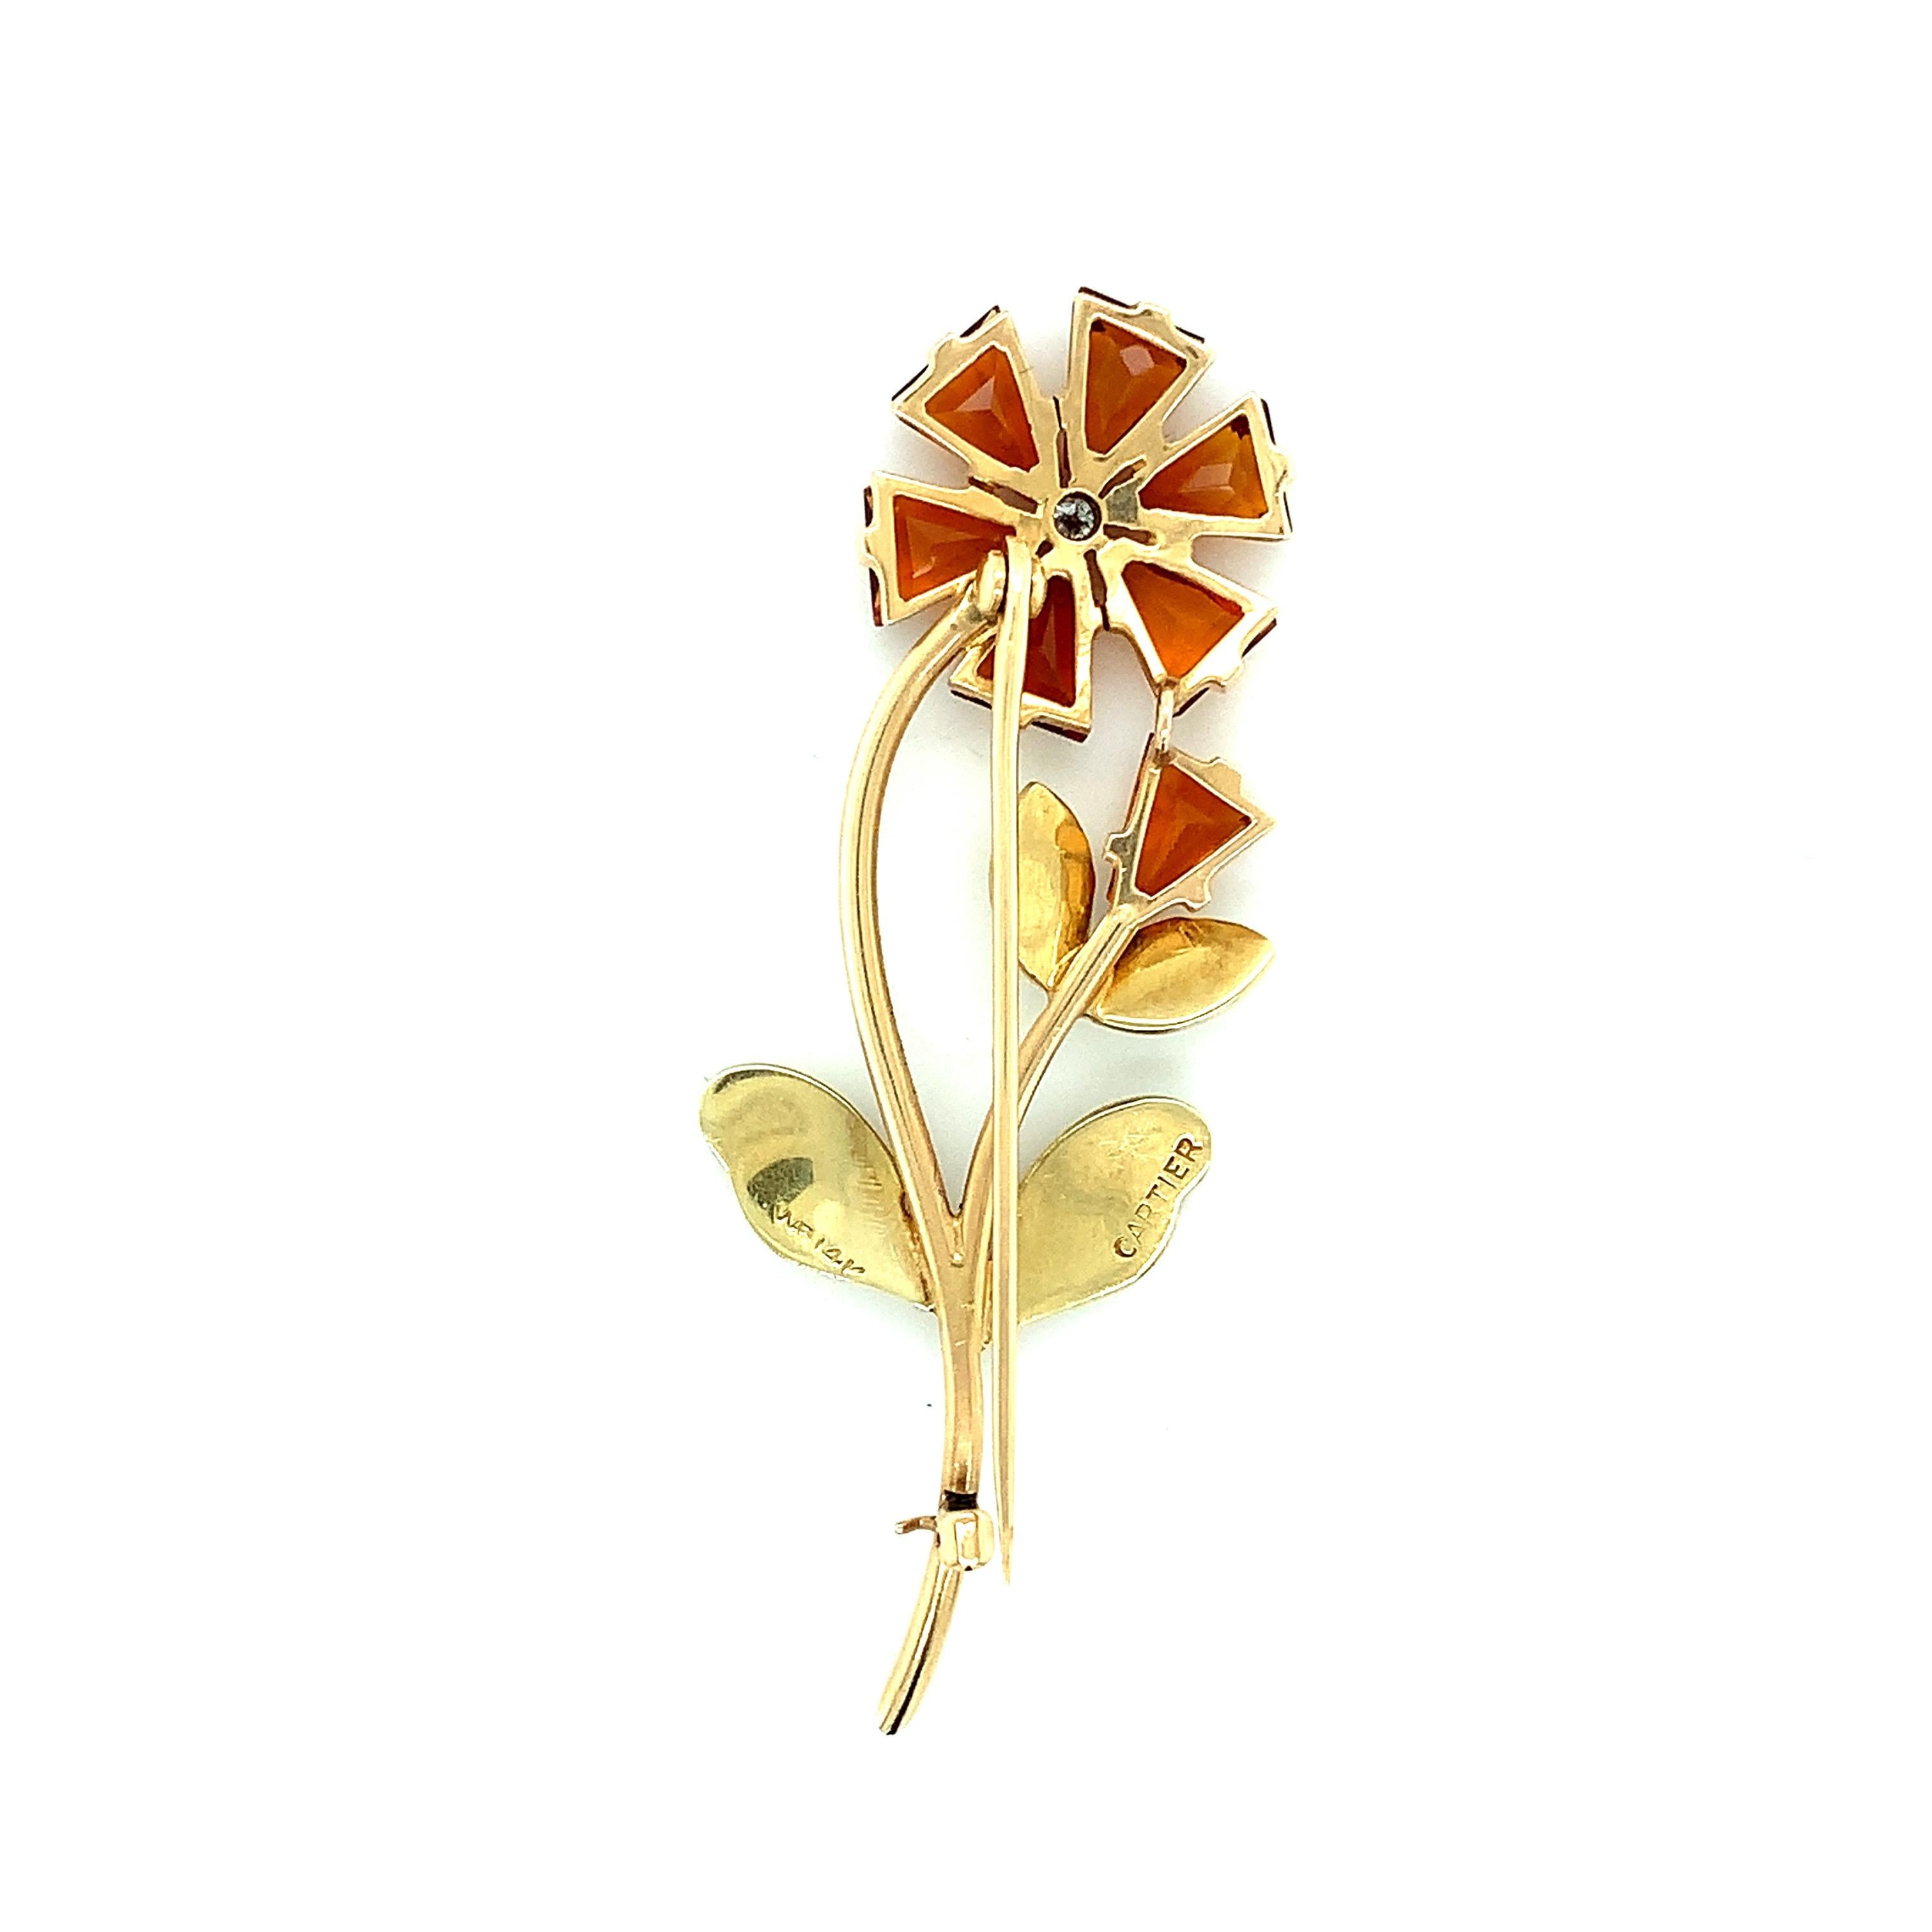 Cartier brooch with a flower motif. The flower's petals are made out of citrine while its stem and leaves are made out of 14 karat yellow gold. There is a single round cut diamond at the center of the flower. Marked: Cartier / 14K. Total weight: 8.3